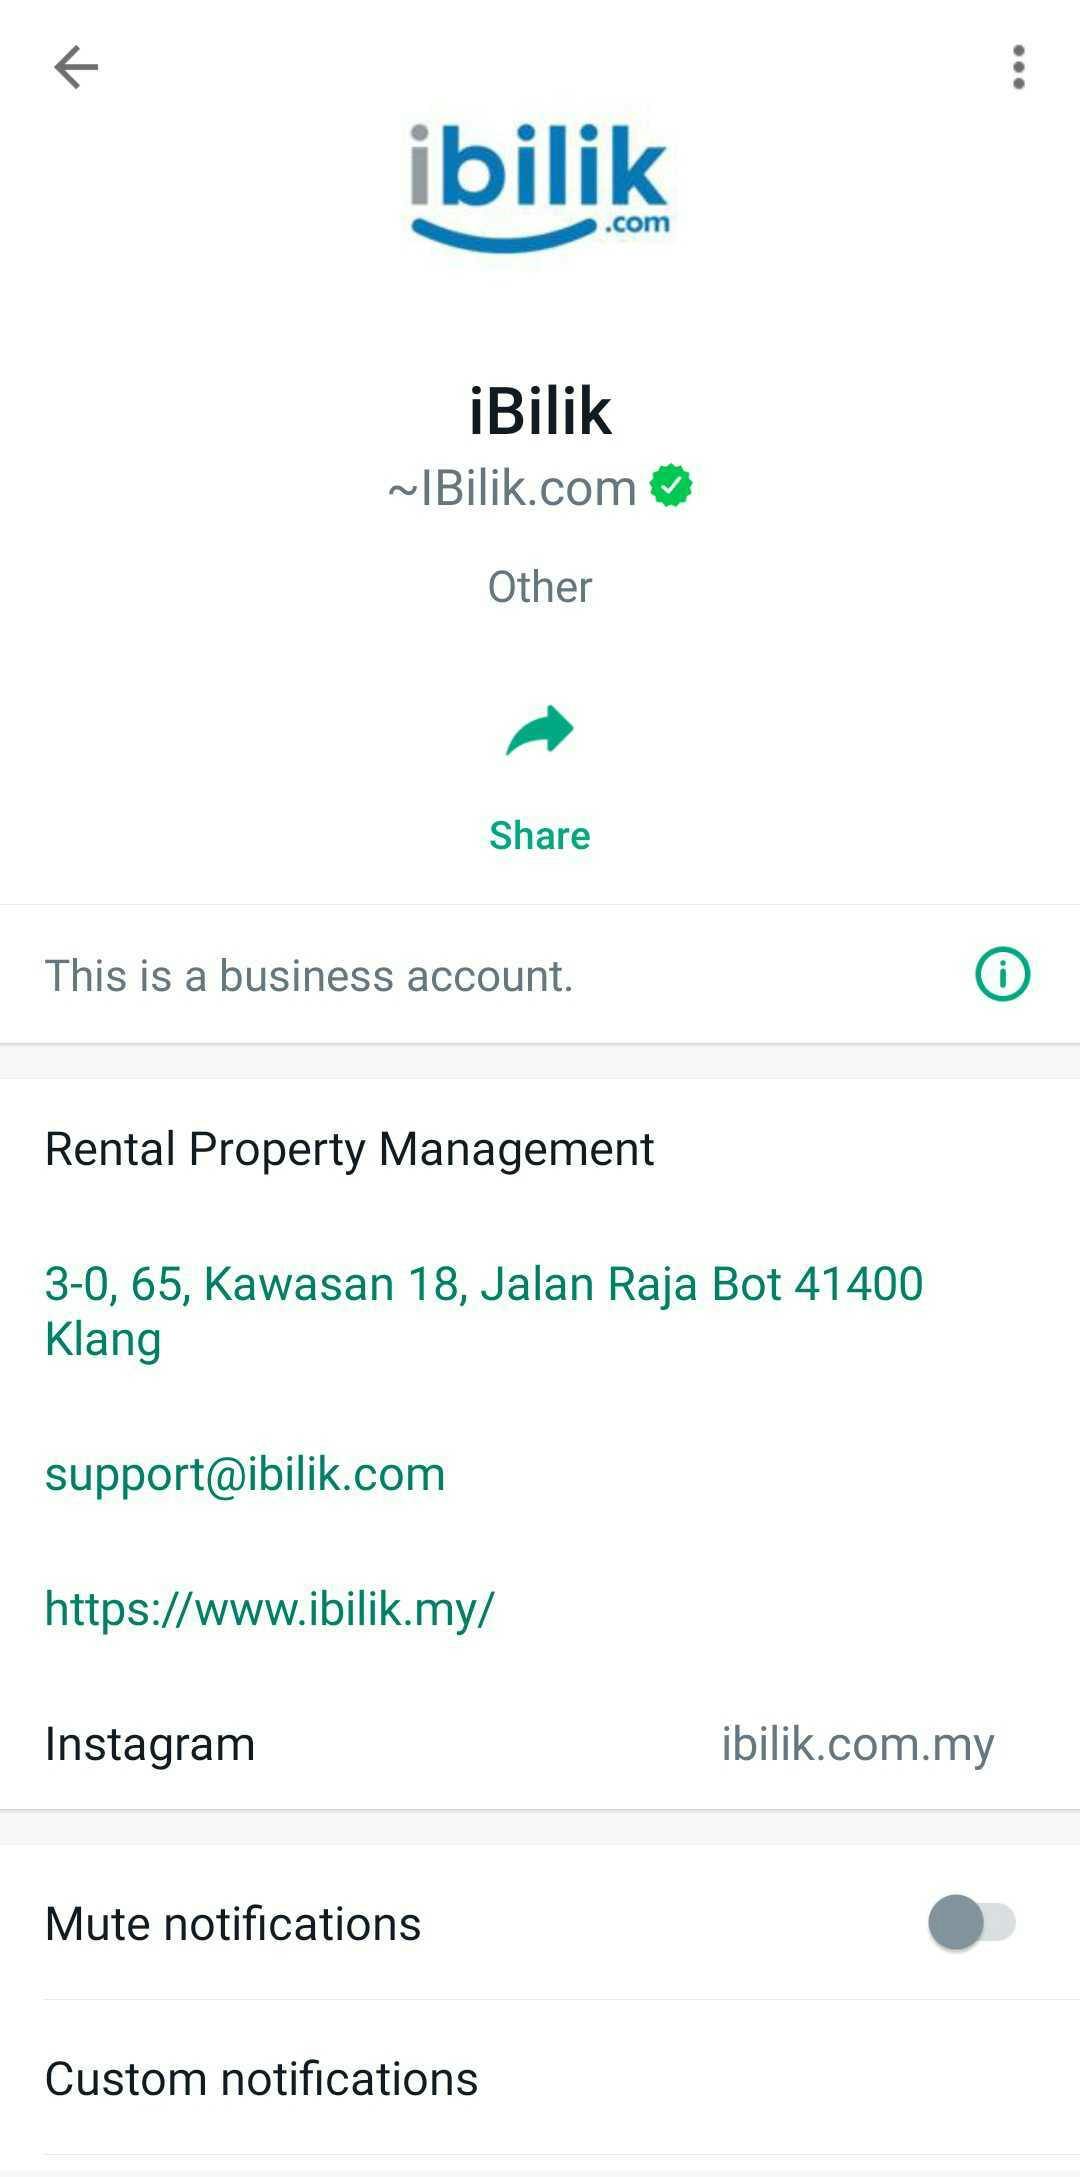 iBilik's official WhatsApp Business account